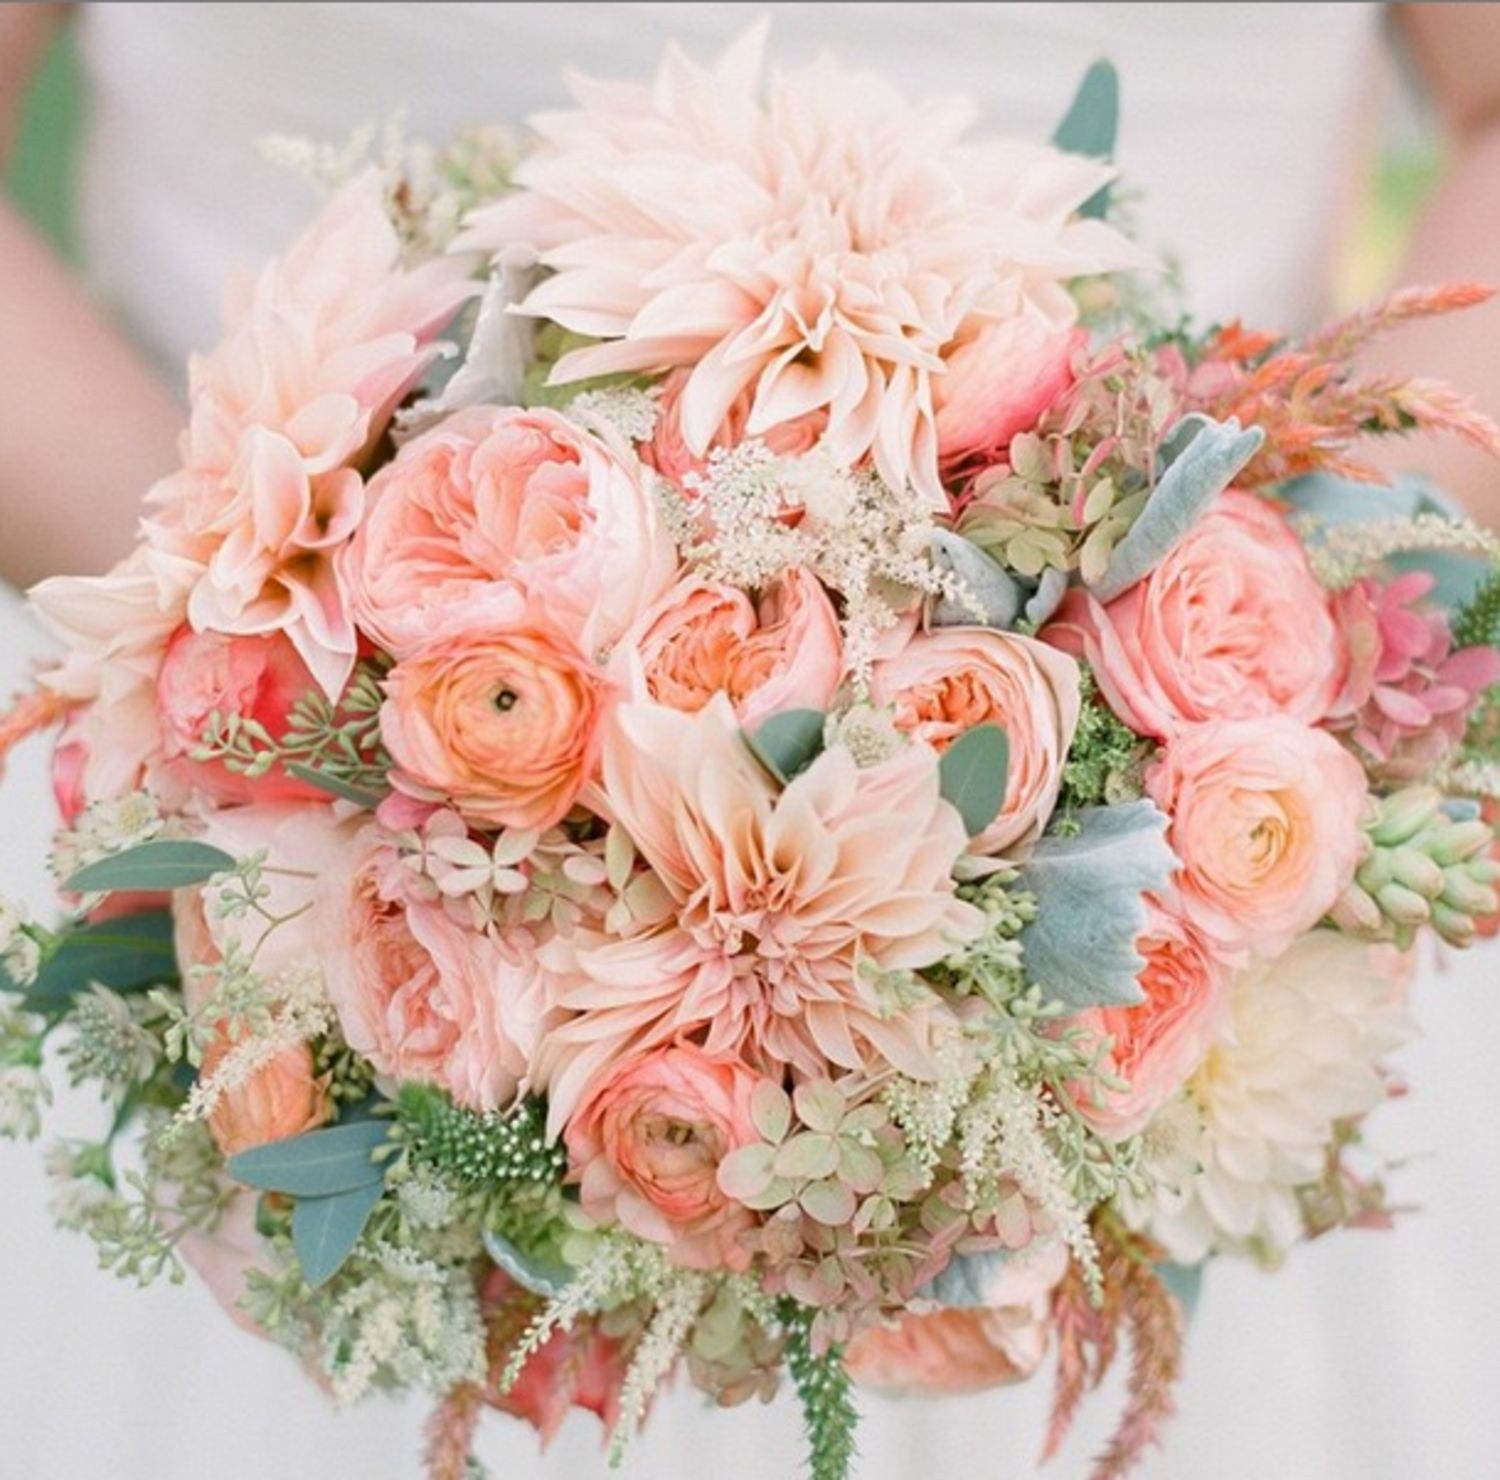 Flowers For Wedding Bouquet
 Best Wedding Flowers 13 Gorgeous Bridal Bouquets in Every